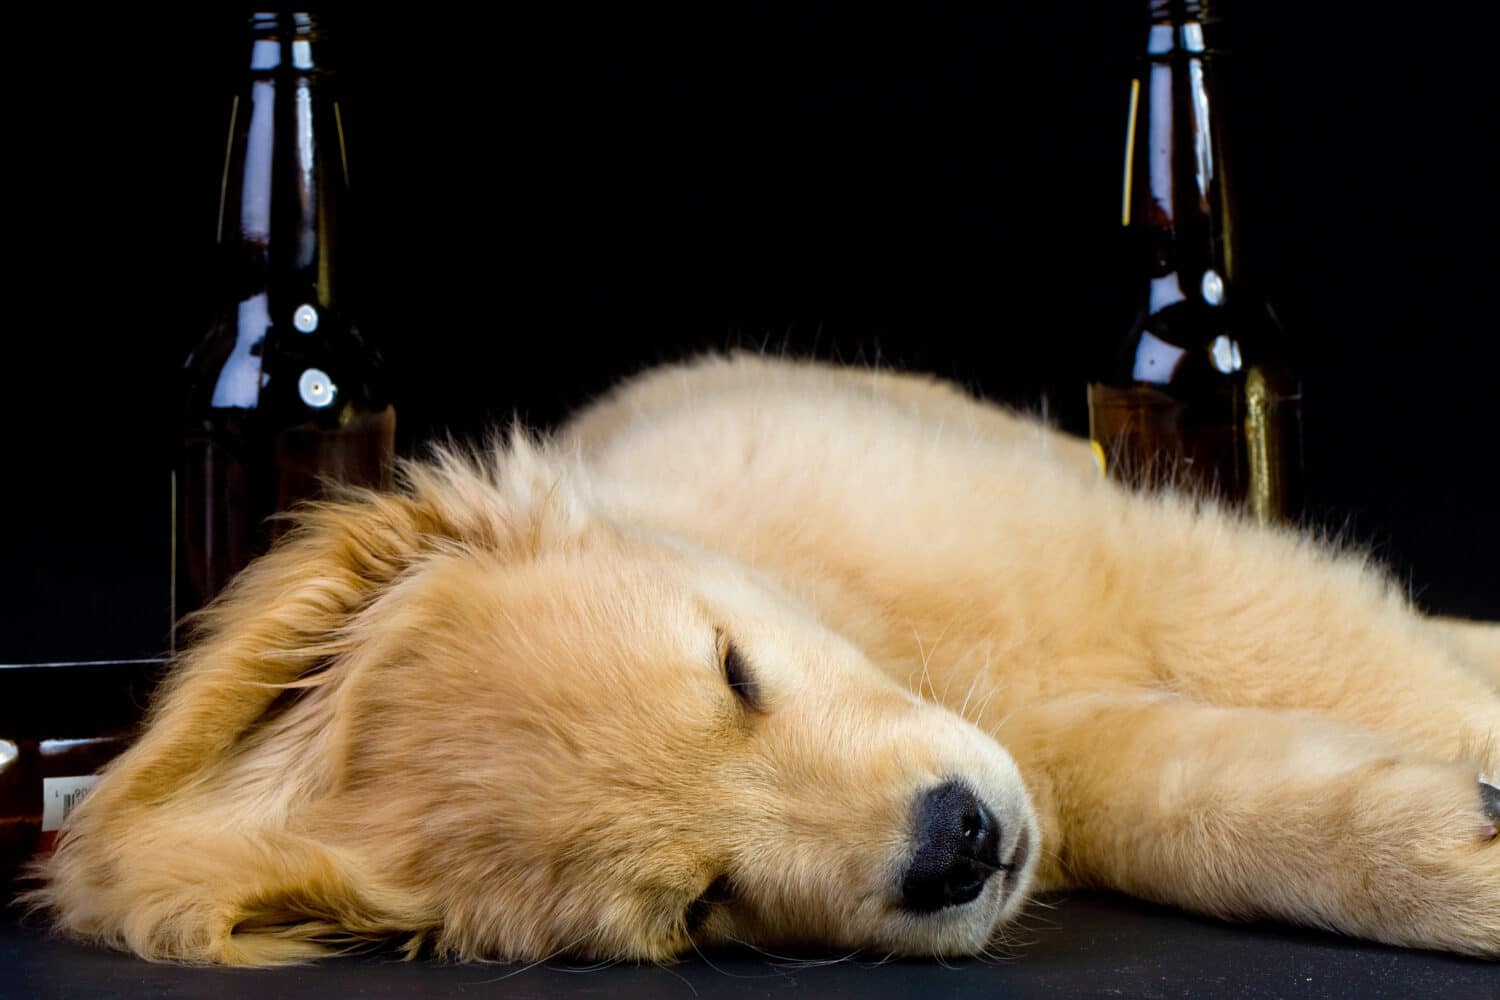 A concerned dog experiencing the effects of intoxication, underscoring the hazards of toxic substances and the vital role of prevention and quick veterinary intervention.